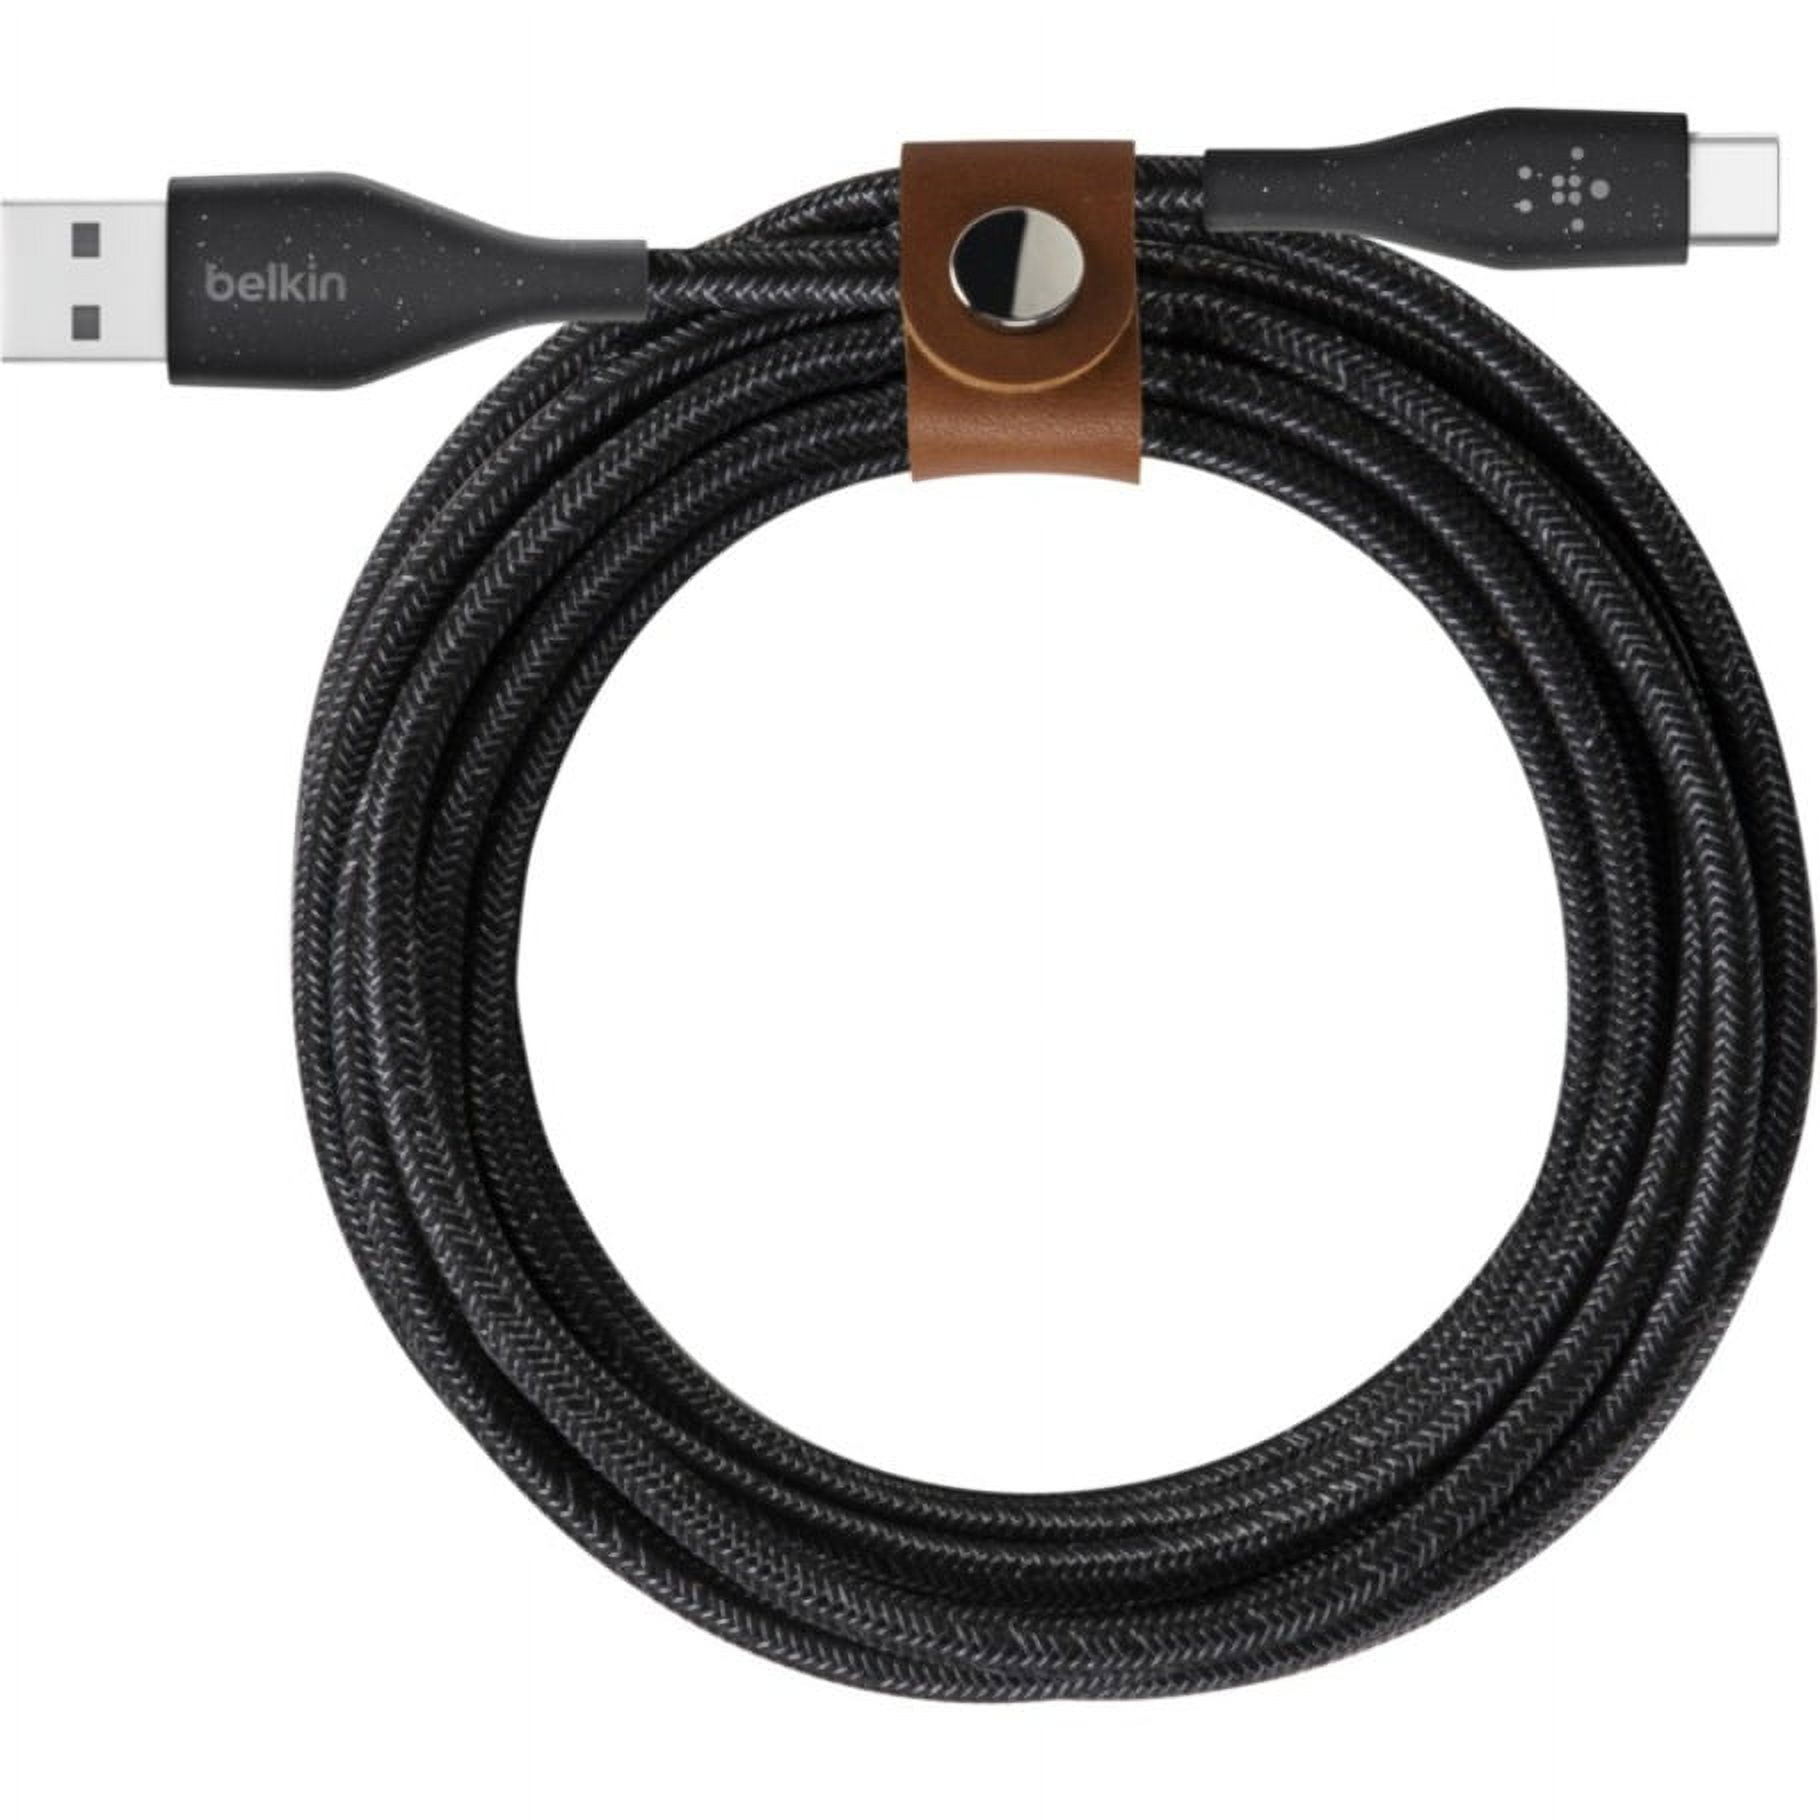 3.1 USB-A to USB-C Cable - 3.3ft/1m, 10Gpbs, Belkin